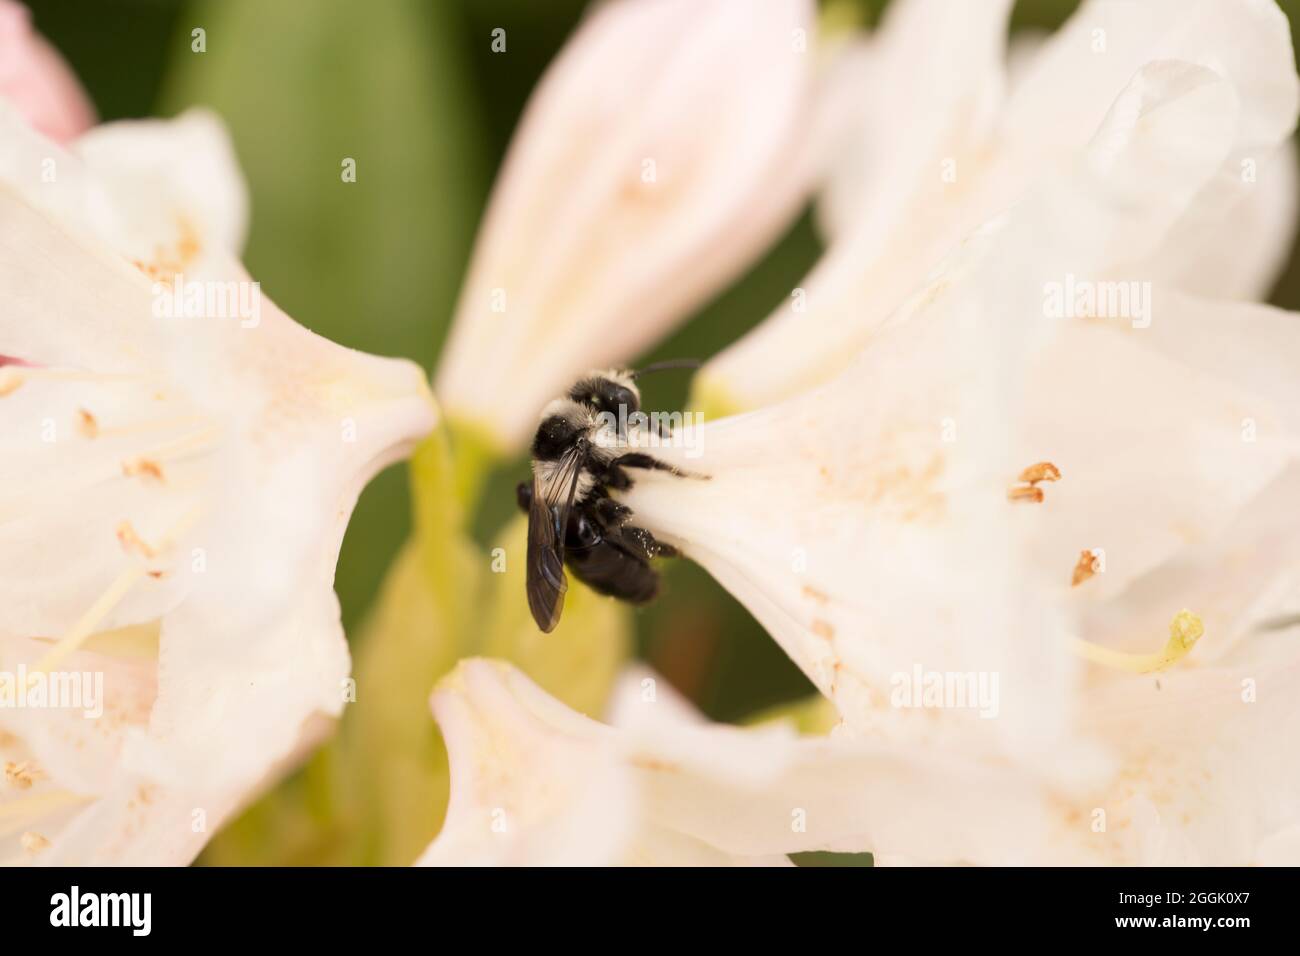 Hoverfly, (Flower fly, Syrphid fly) on Rhododendron flower Stock Photo